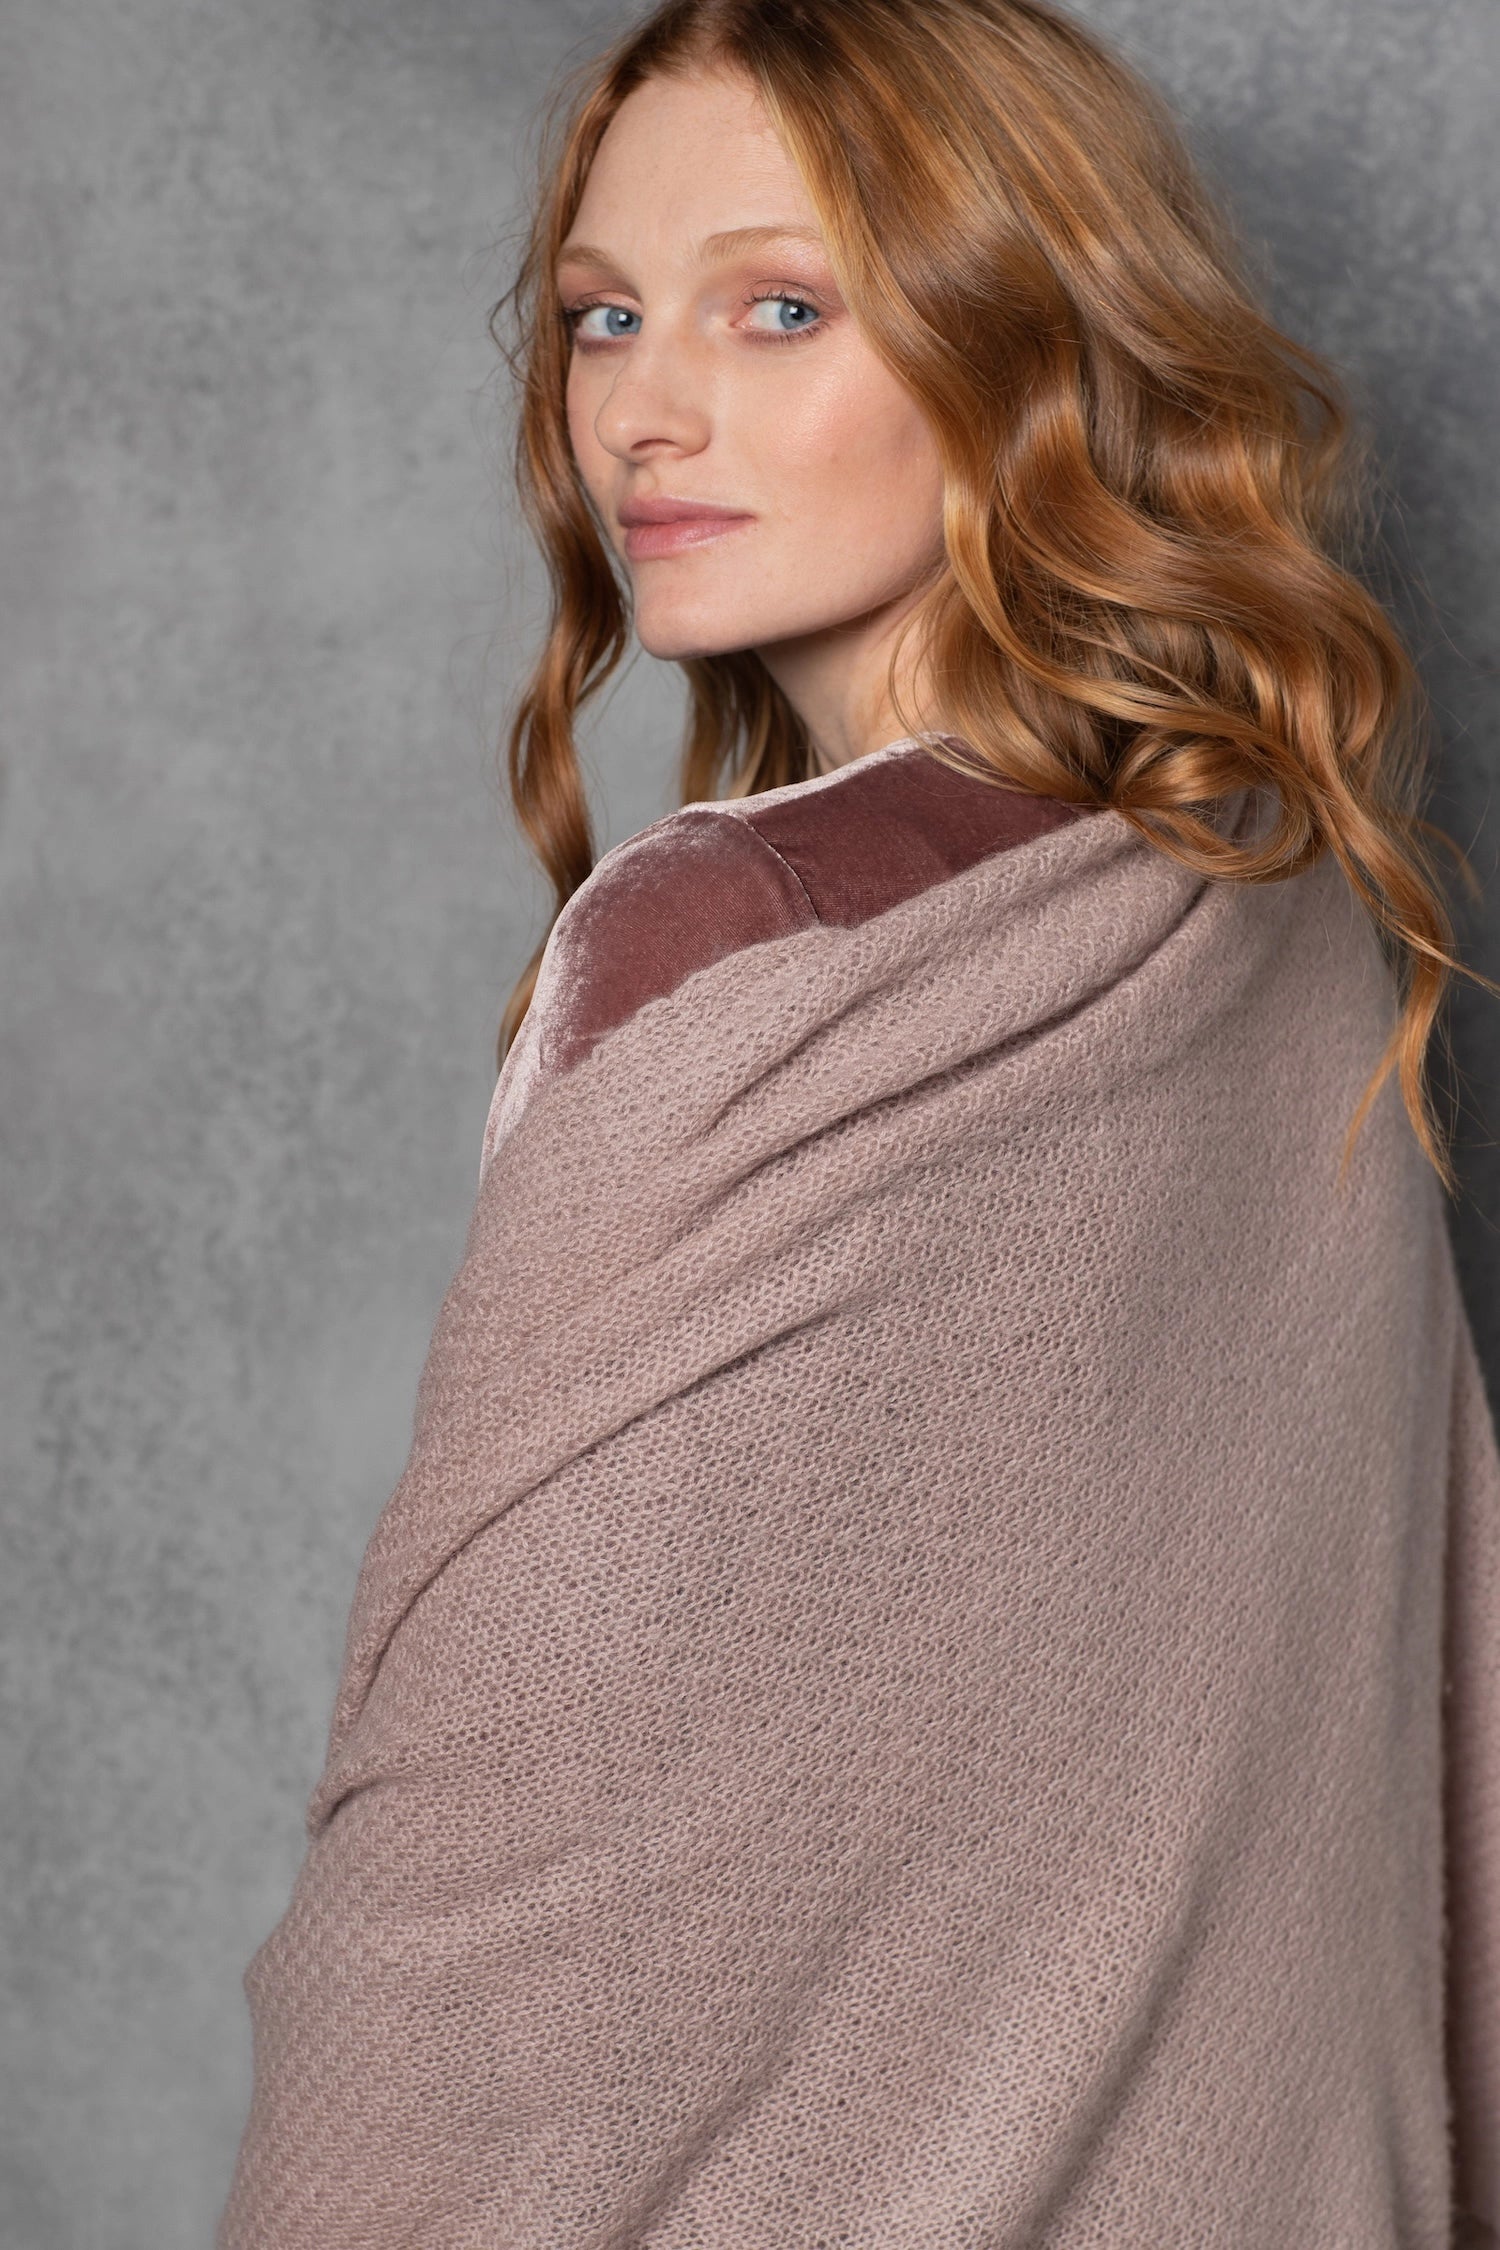 Luxury Cashmere Large Wrap Scarf in Dusty Pink